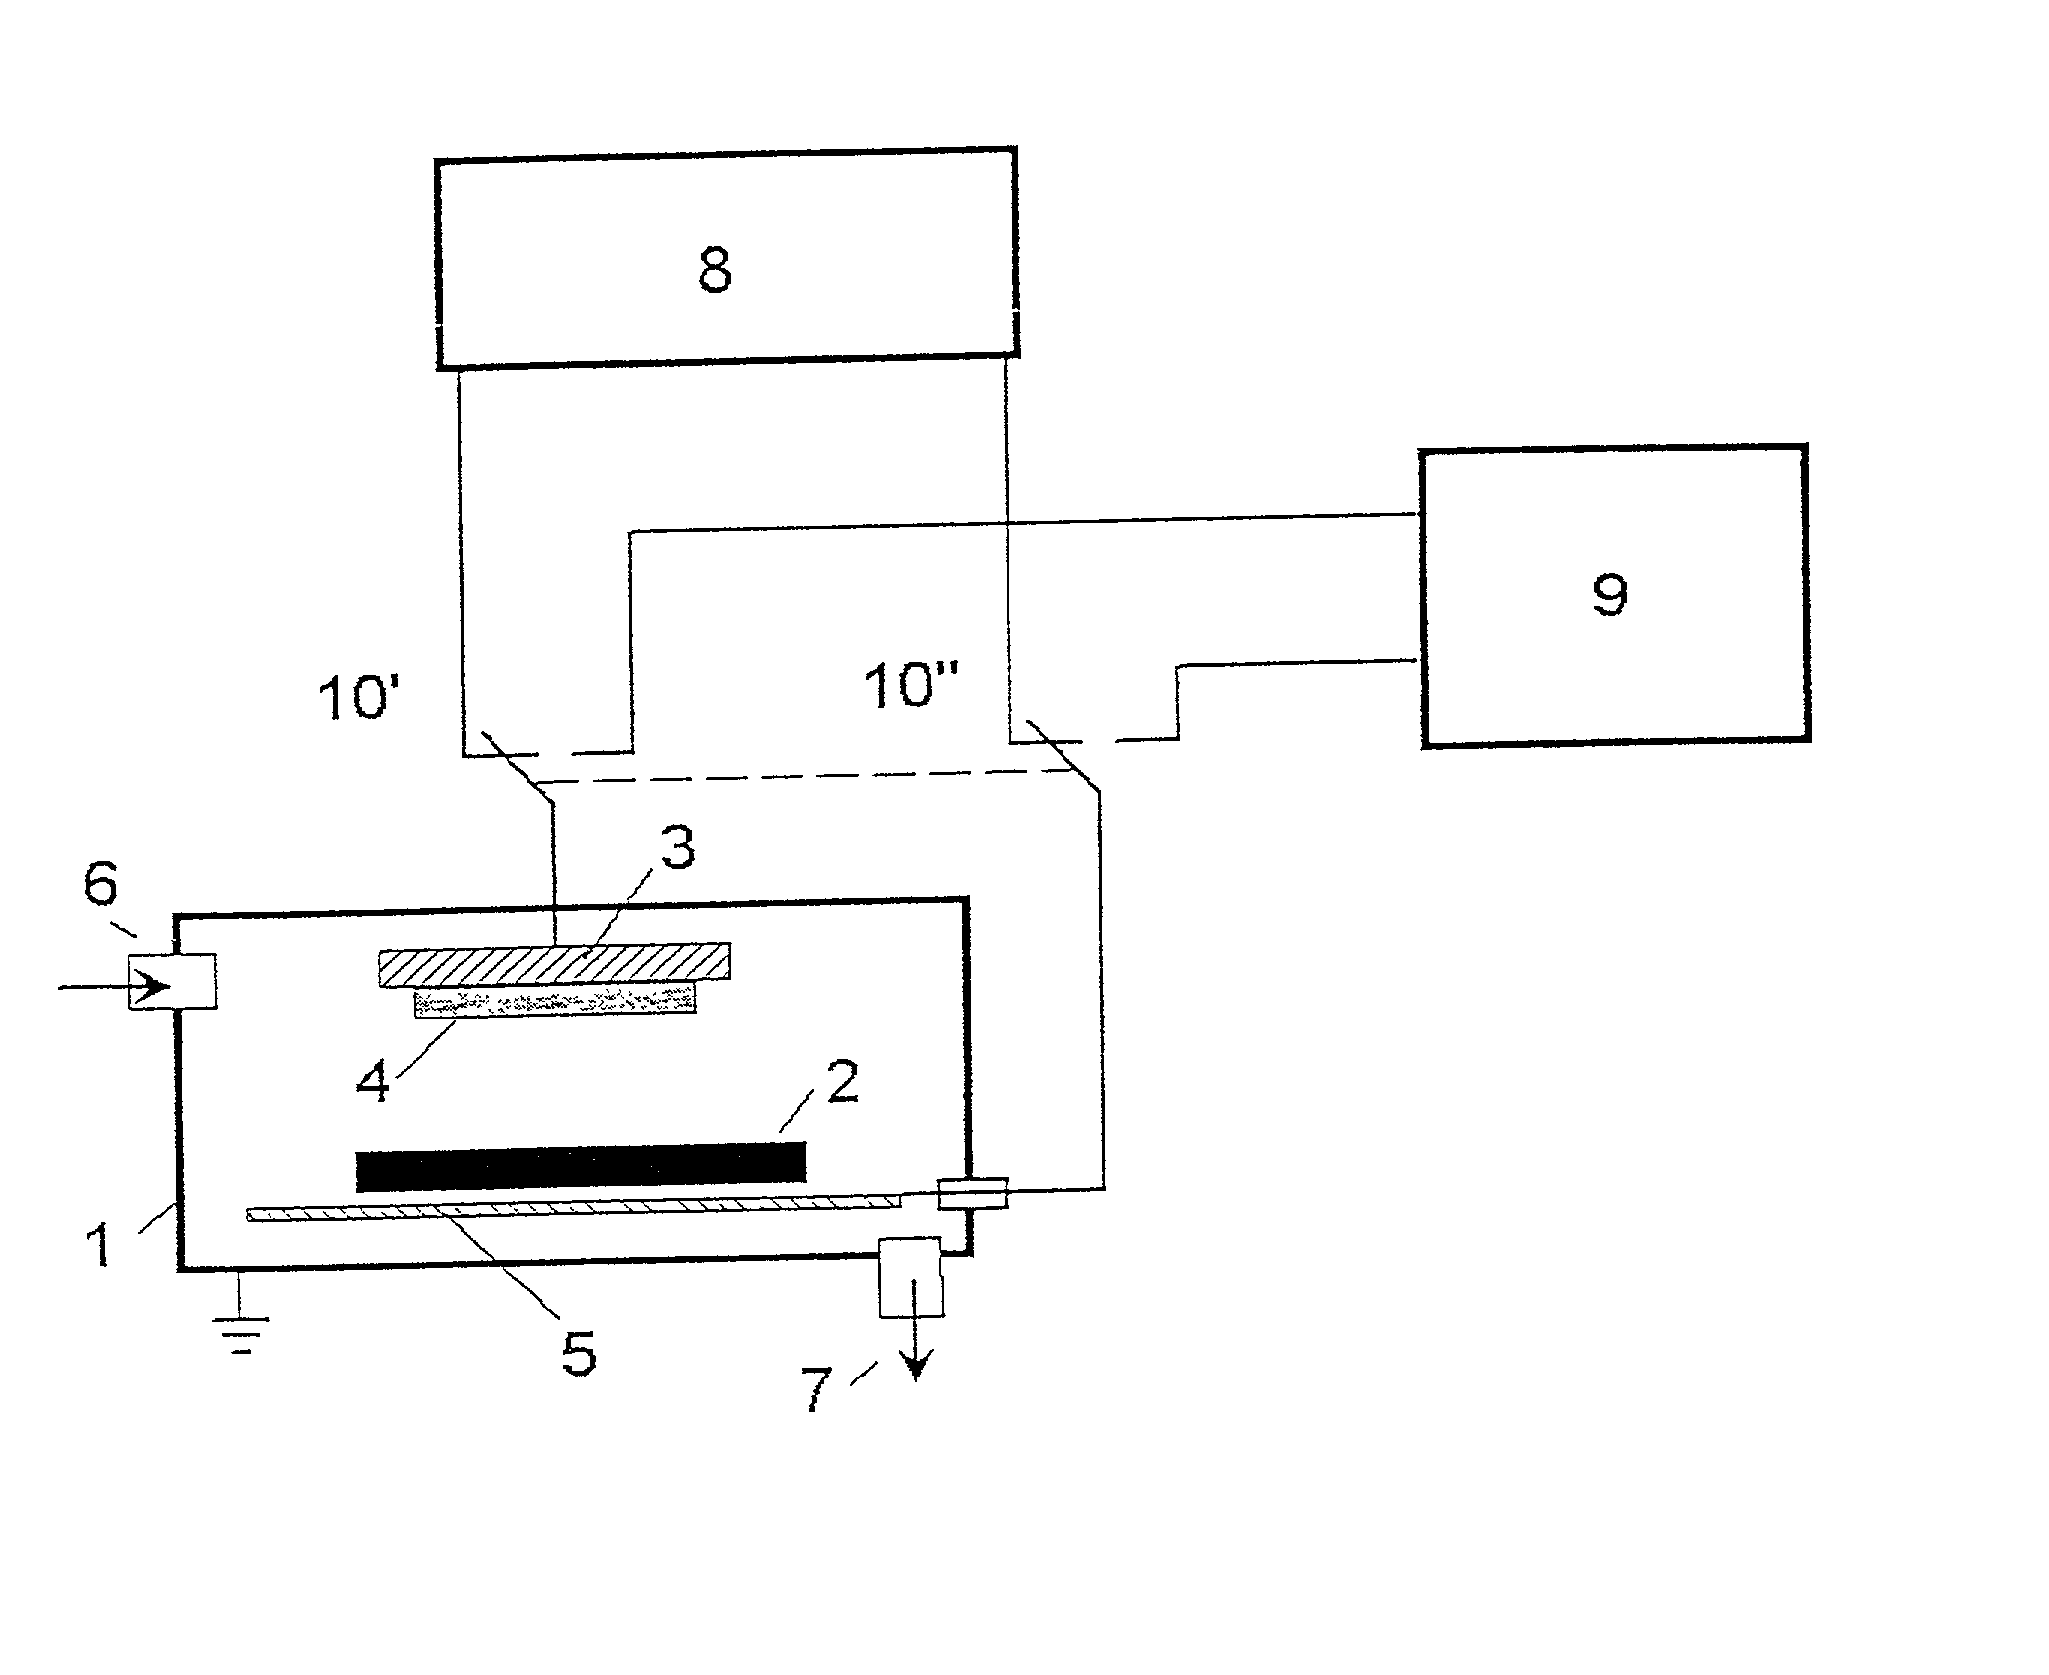 Process and device for reducing the ignition voltage of plasmas operated using pulses of pulsed power